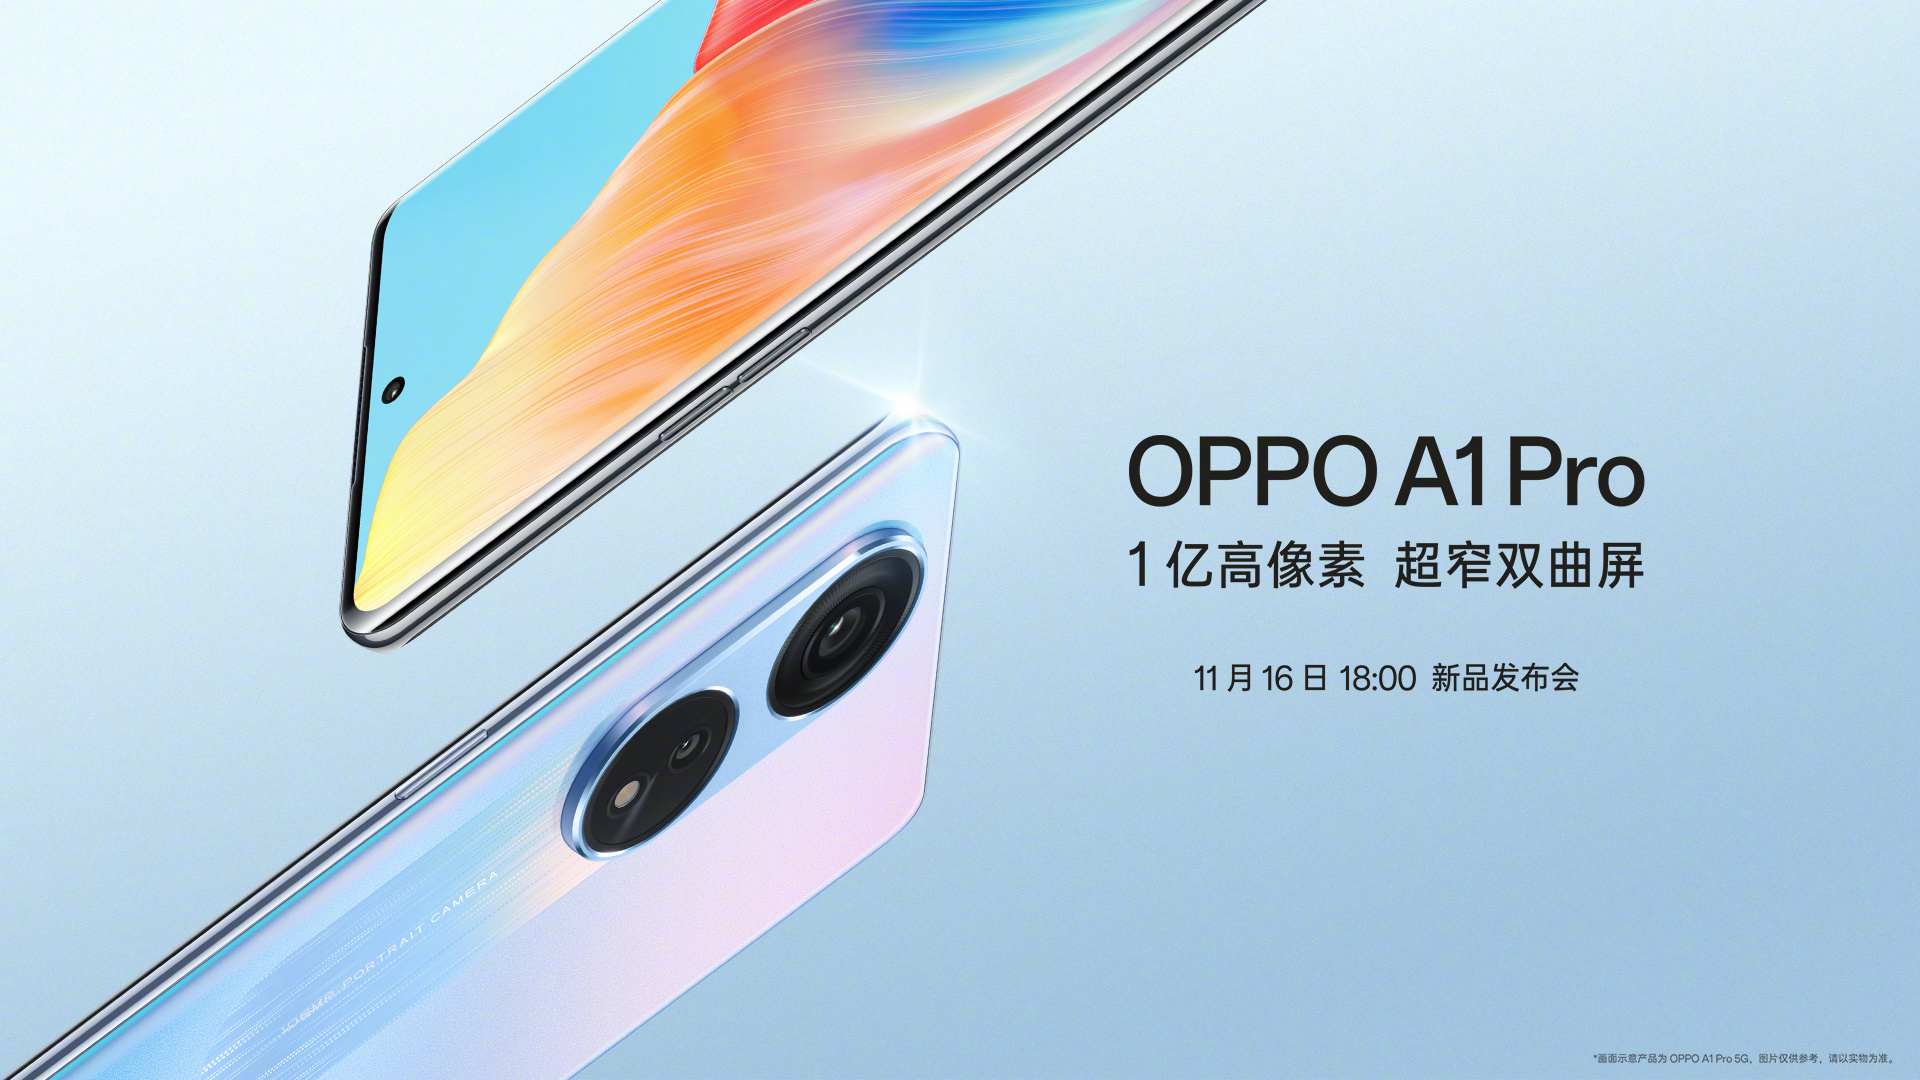 OPPO A1 Pro with AMOLED screen at 120 Hz, Snapdragon 695 chip and 108 MP camera will be presented on November 16